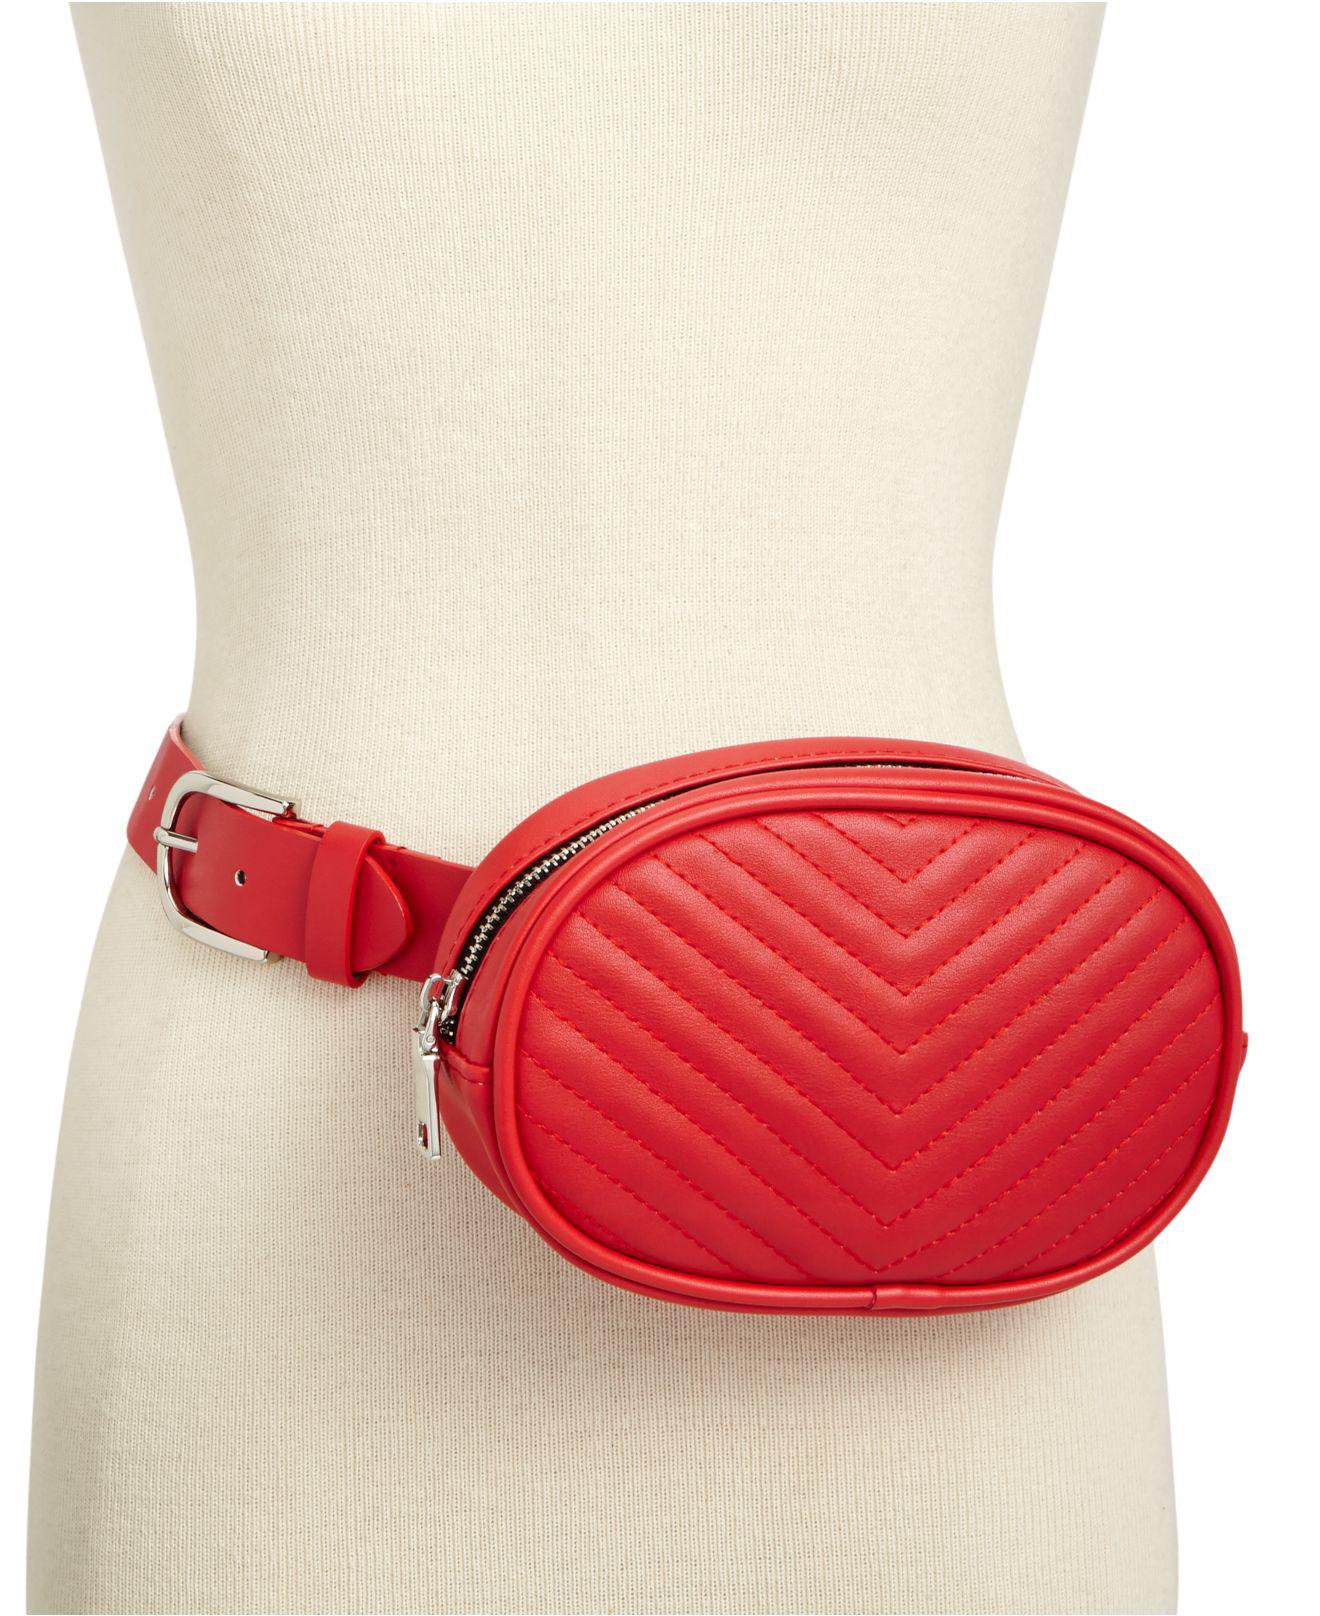 Steve Madden Chevron Quilted Fanny Pack in Red